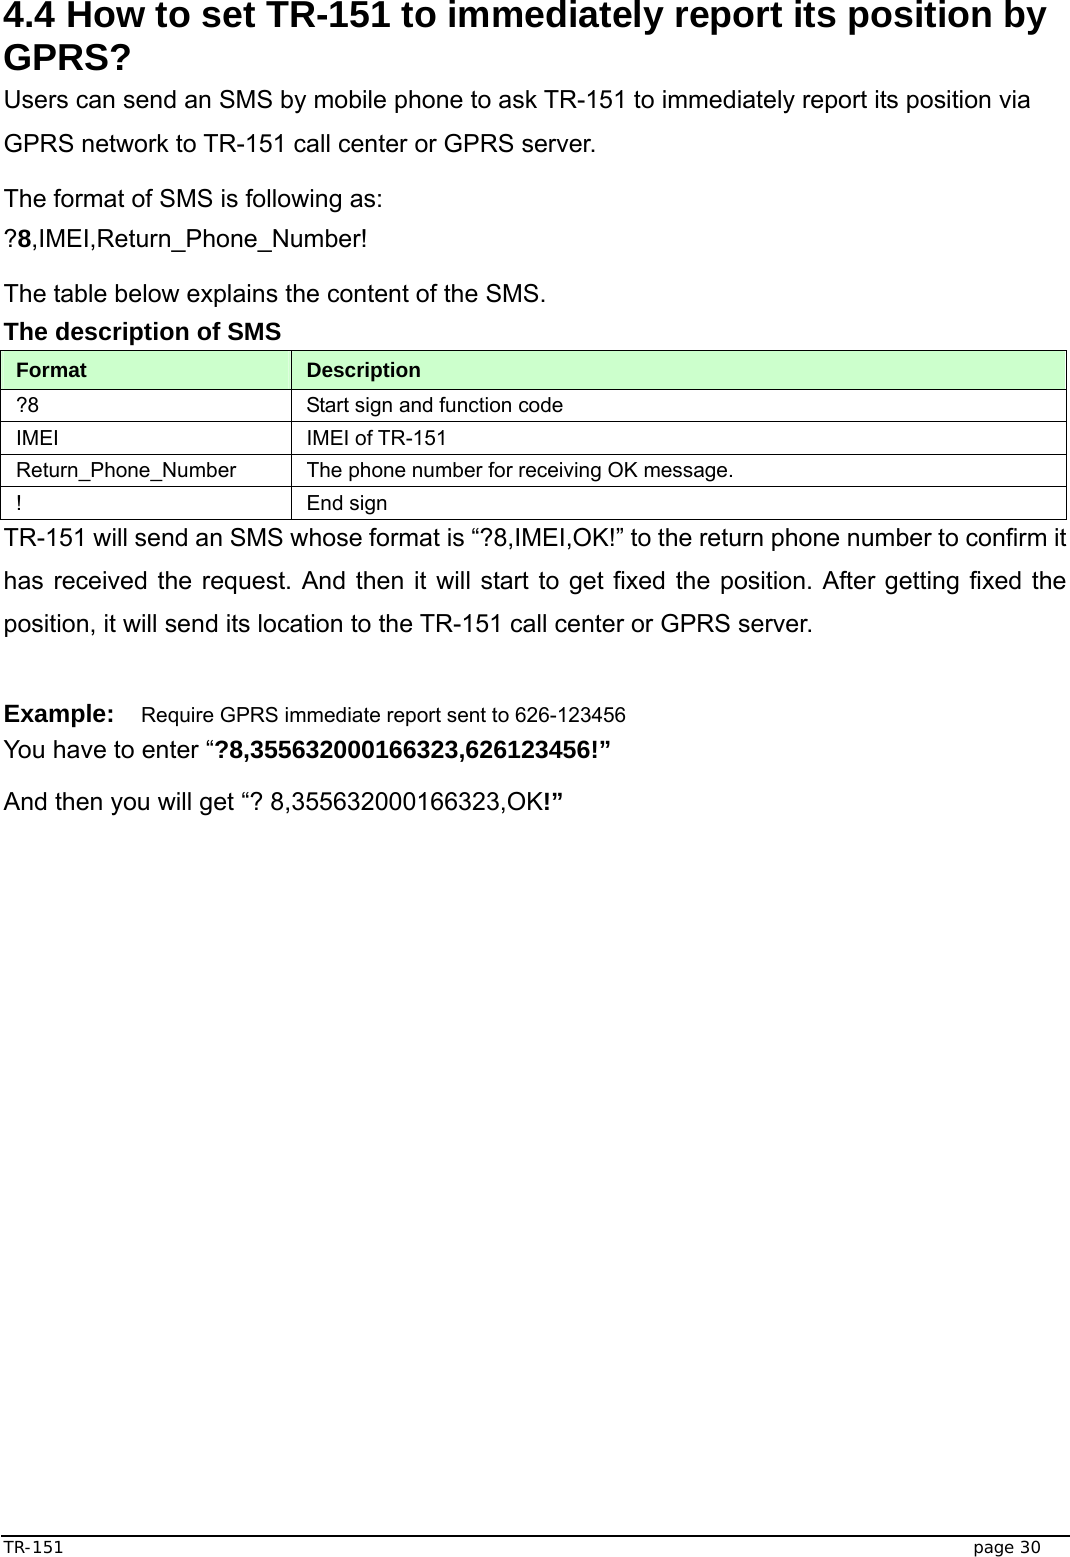  TR-151   page 30 4.4 How to set TR-151 to immediately report its position by GPRS? Users can send an SMS by mobile phone to ask TR-151 to immediately report its position via GPRS network to TR-151 call center or GPRS server. The format of SMS is following as: ?8,IMEI,Return_Phone_Number! The table below explains the content of the SMS. The description of SMS   Format  Description ?8  Start sign and function code IMEI IMEI of TR-151 Return_Phone_Number  The phone number for receiving OK message.   ! End sign TR-151 will send an SMS whose format is “?8,IMEI,OK!” to the return phone number to confirm it has received the request. And then it will start to get fixed the position. After getting fixed the position, it will send its location to the TR-151 call center or GPRS server.  Example: Require GPRS immediate report sent to 626-123456 You have to enter “?8,355632000166323,626123456!” And then you will get “? 8,355632000166323,OK!”   